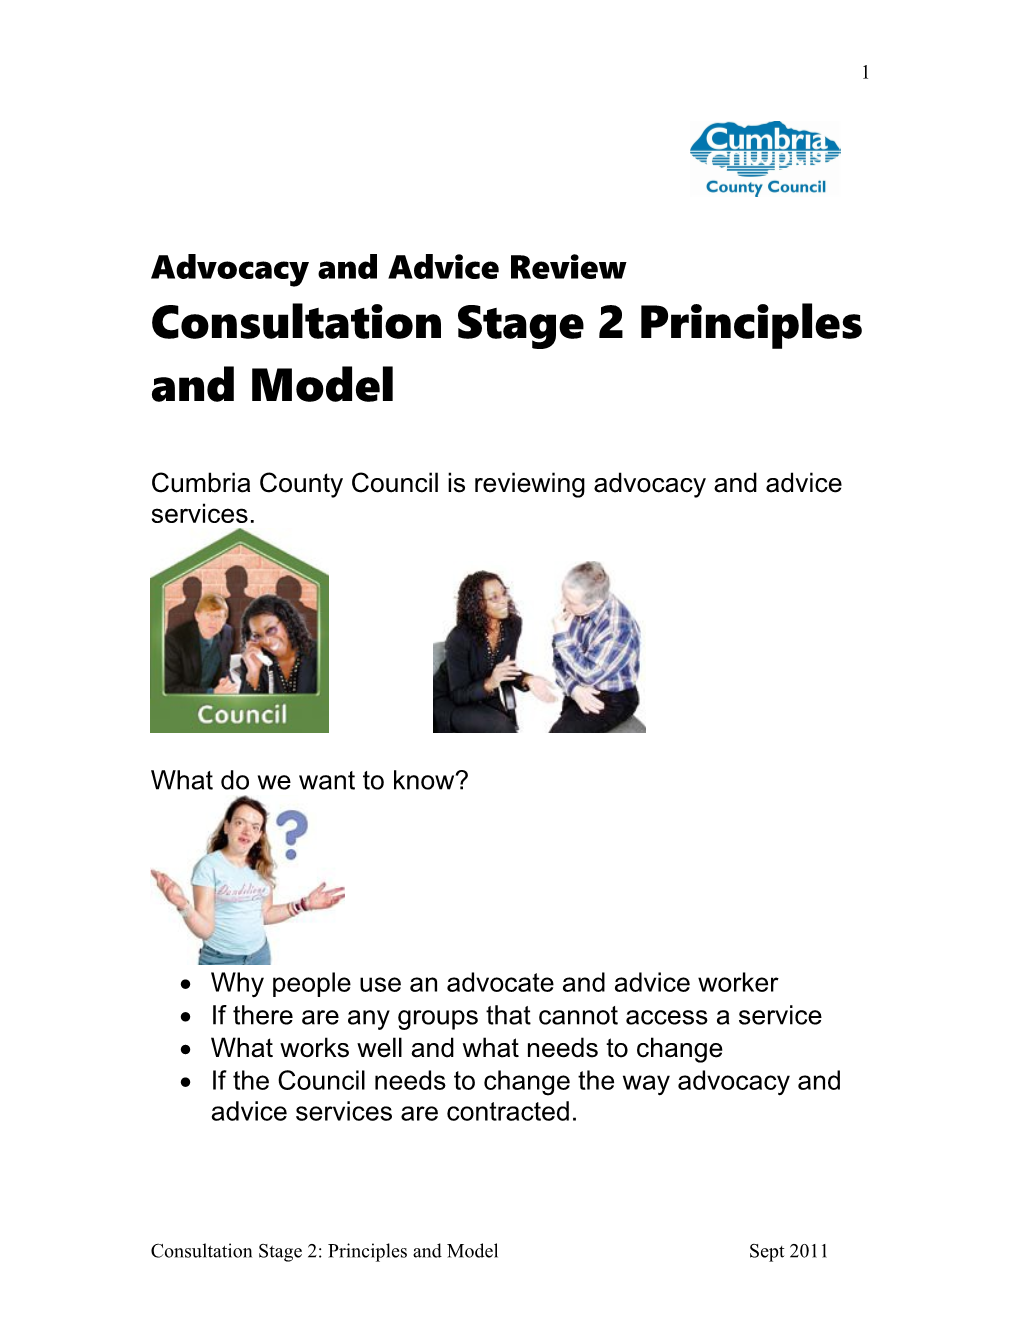 Advocacy Consultation Stage 2